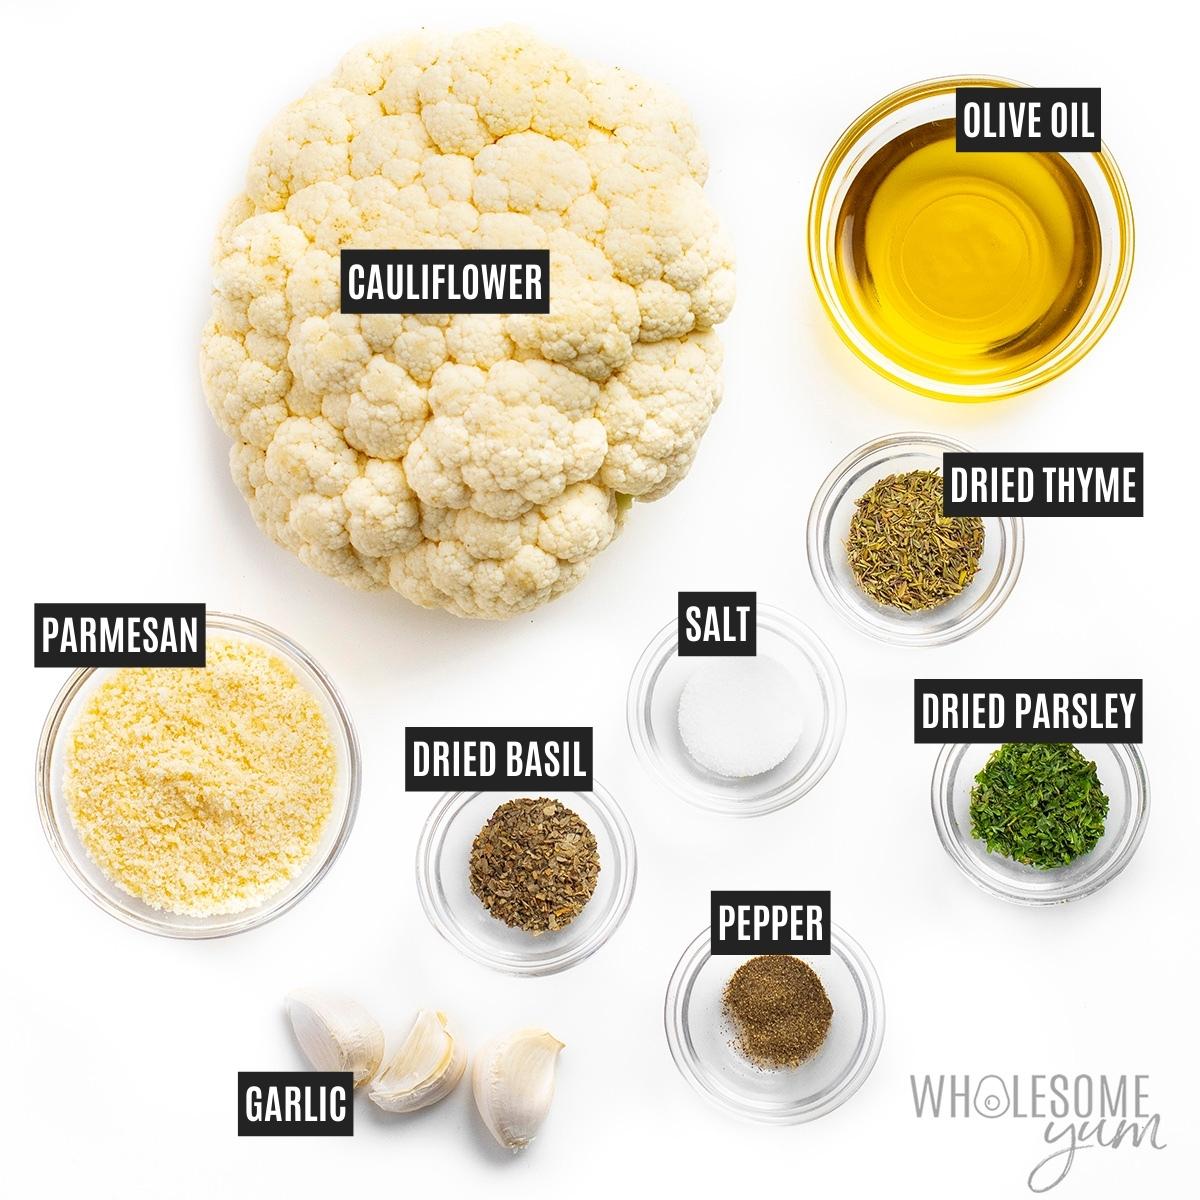 Ingredients for whole roasted cauliflower.